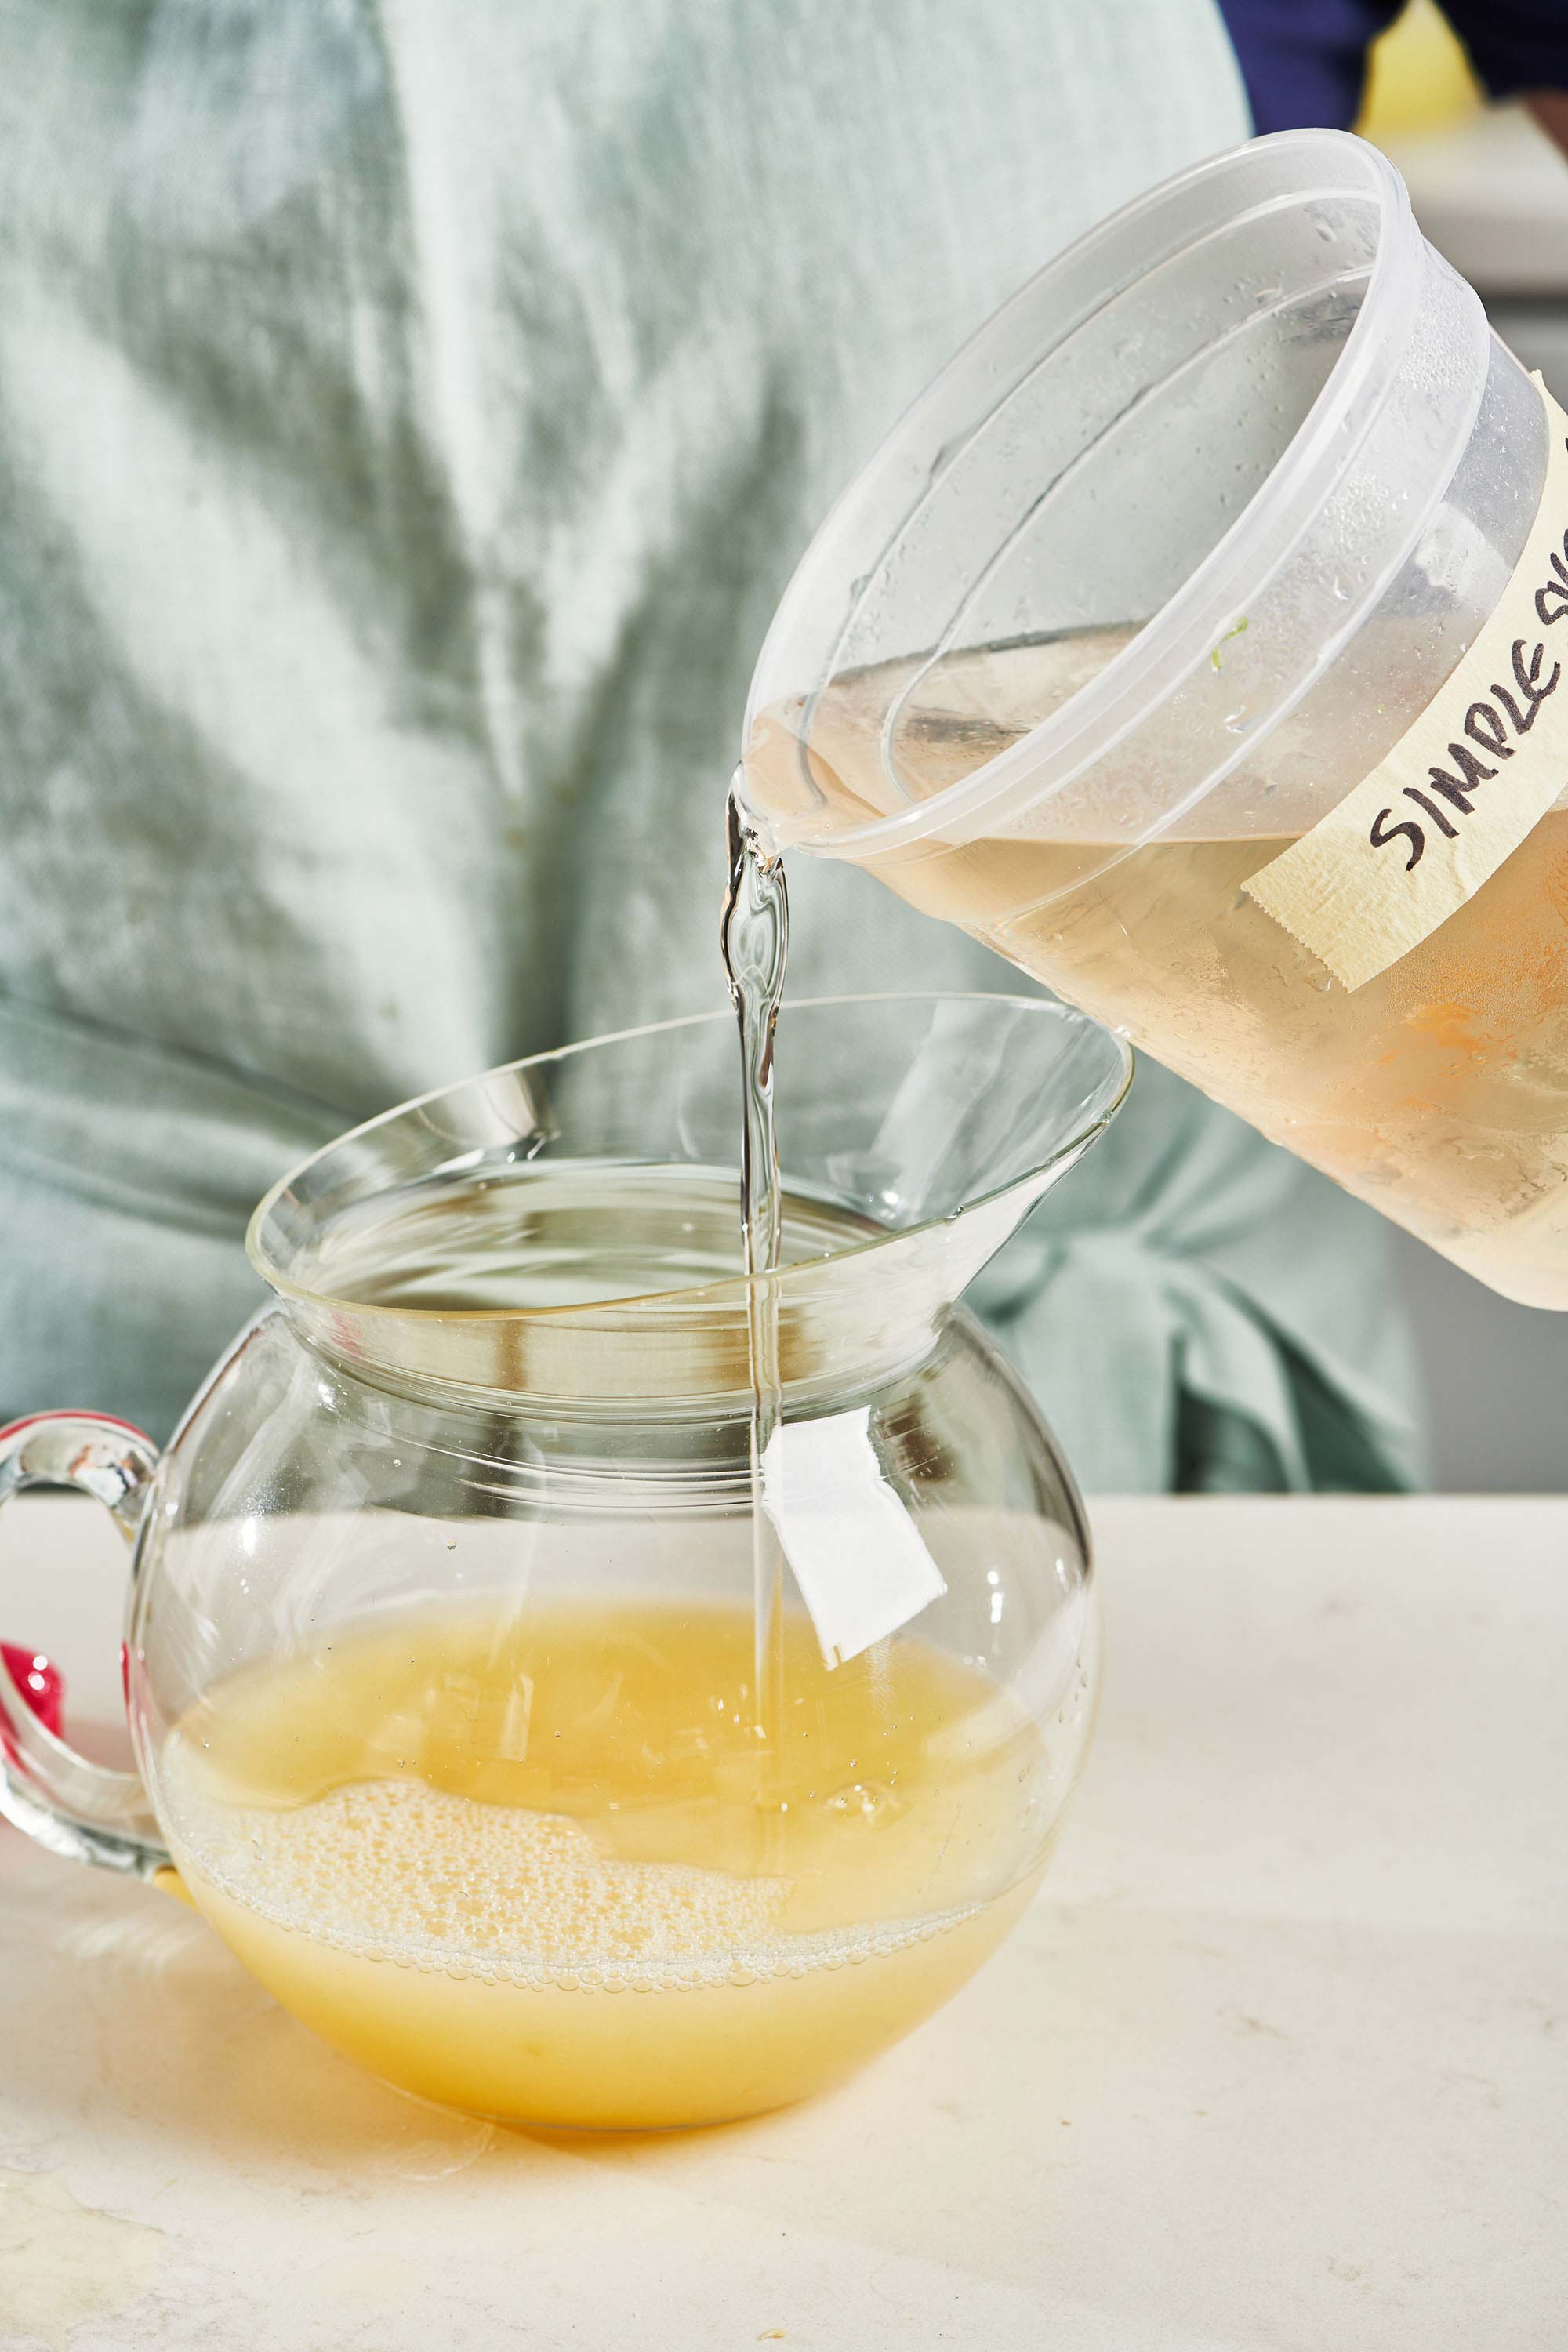 Simple syrup pouring into a pitcher of lemon juice.